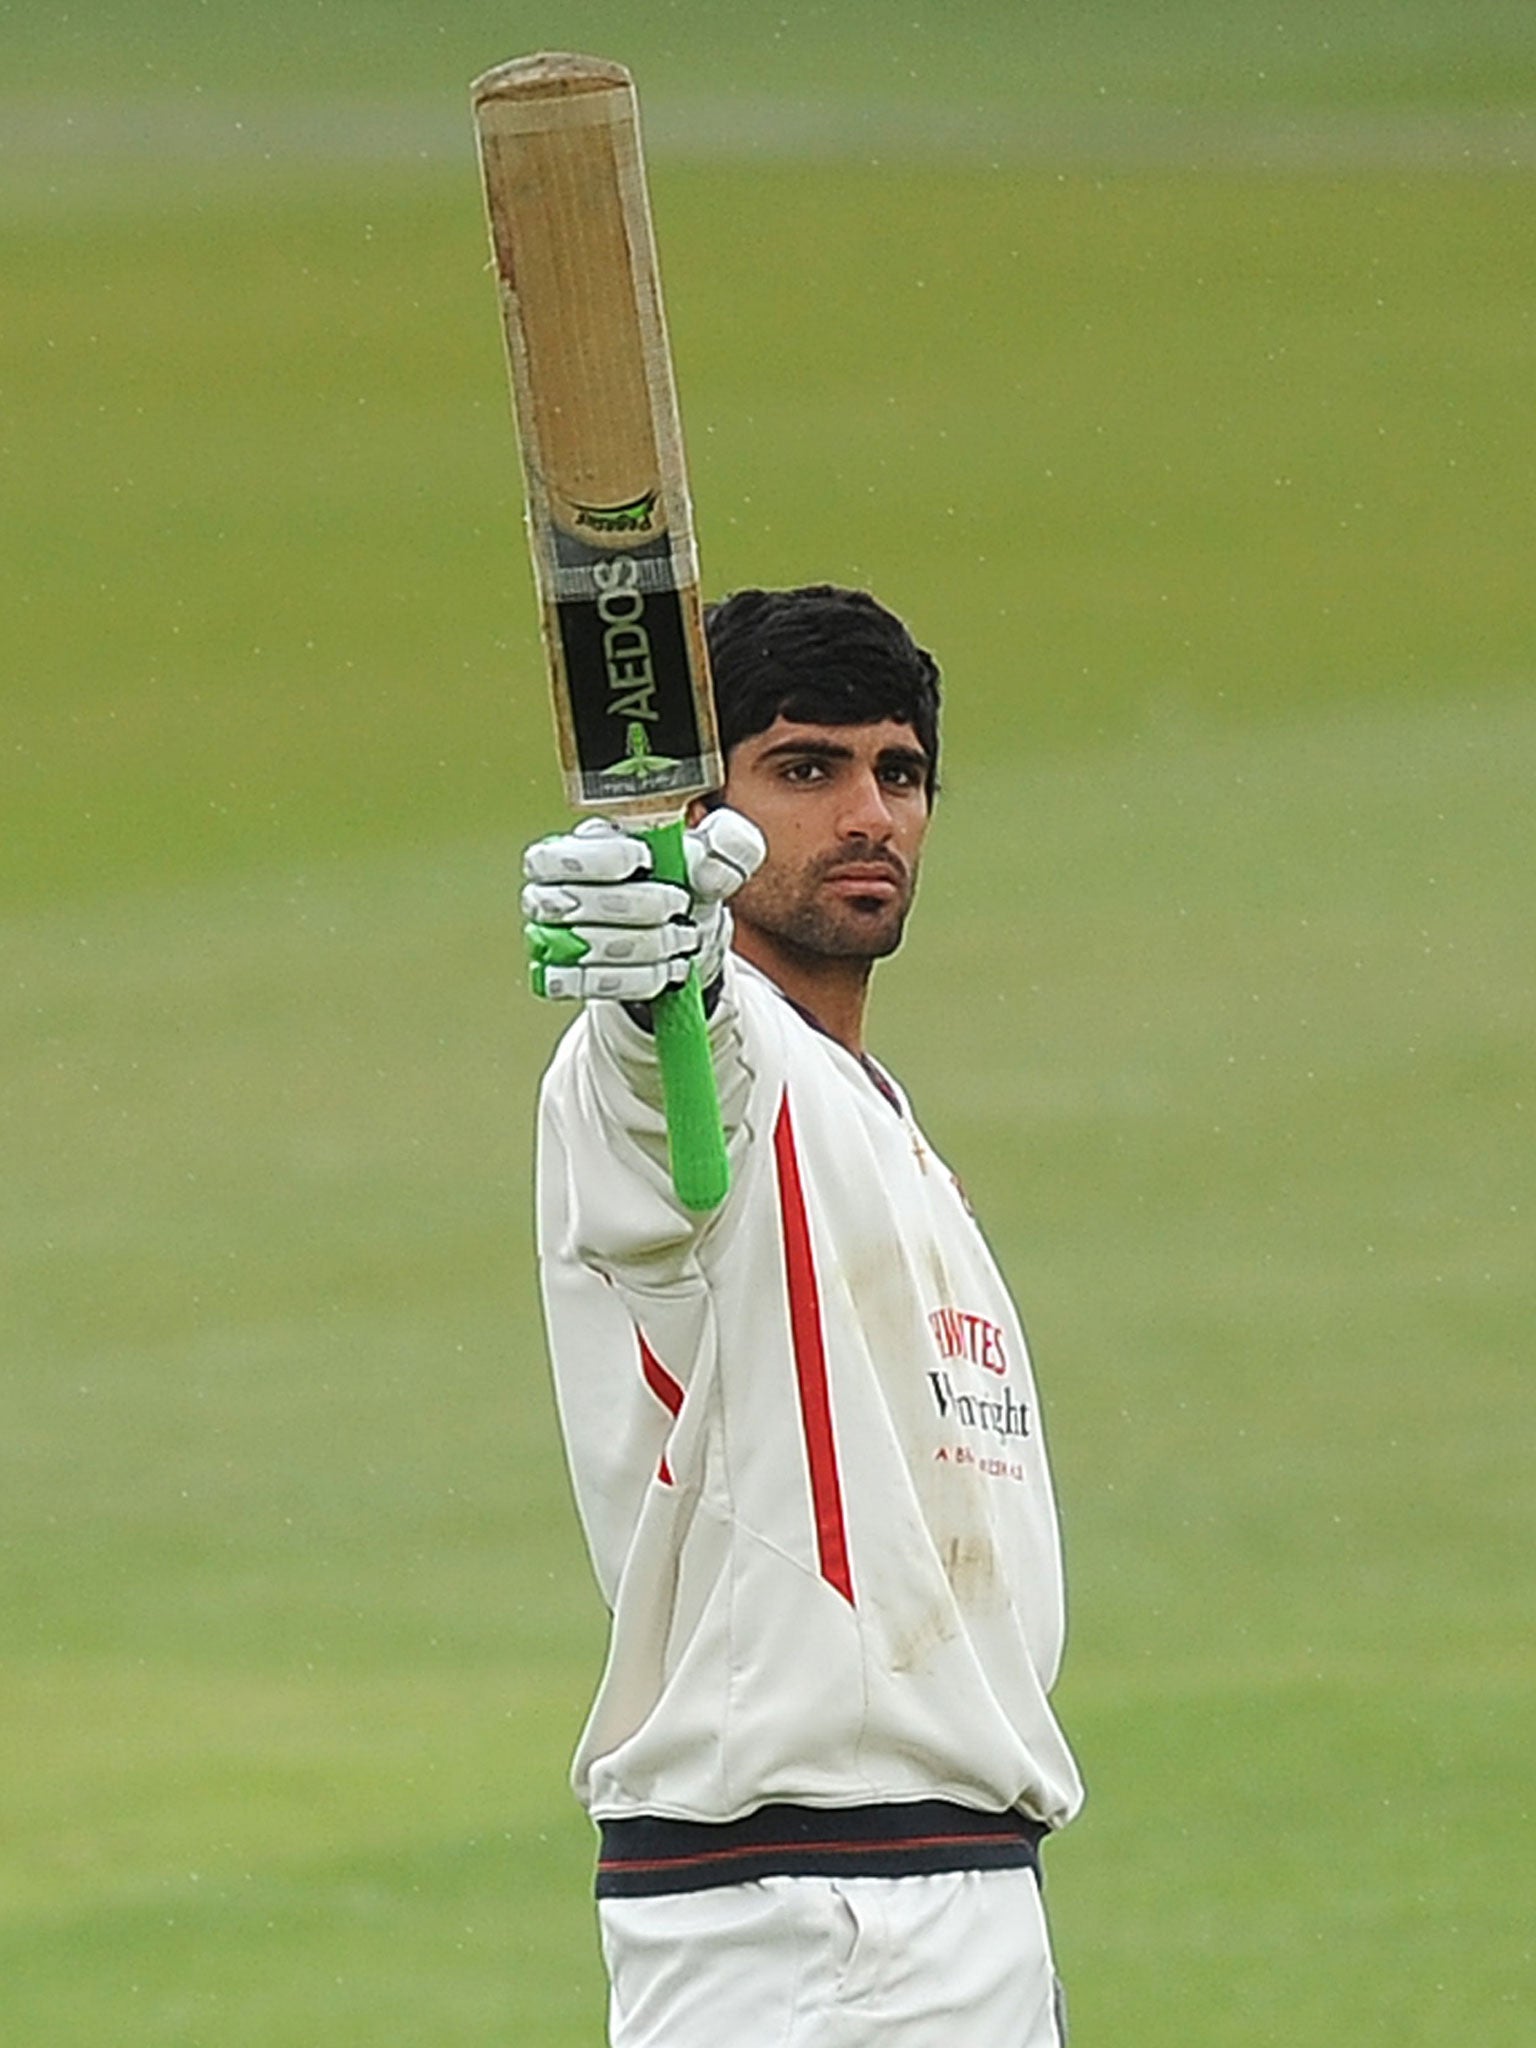 Andrea Agathangelou, the South African-born all-rounder with Greek Cypriot heritage, completed a maiden century for Lancashire in a match for which he was not originally selected